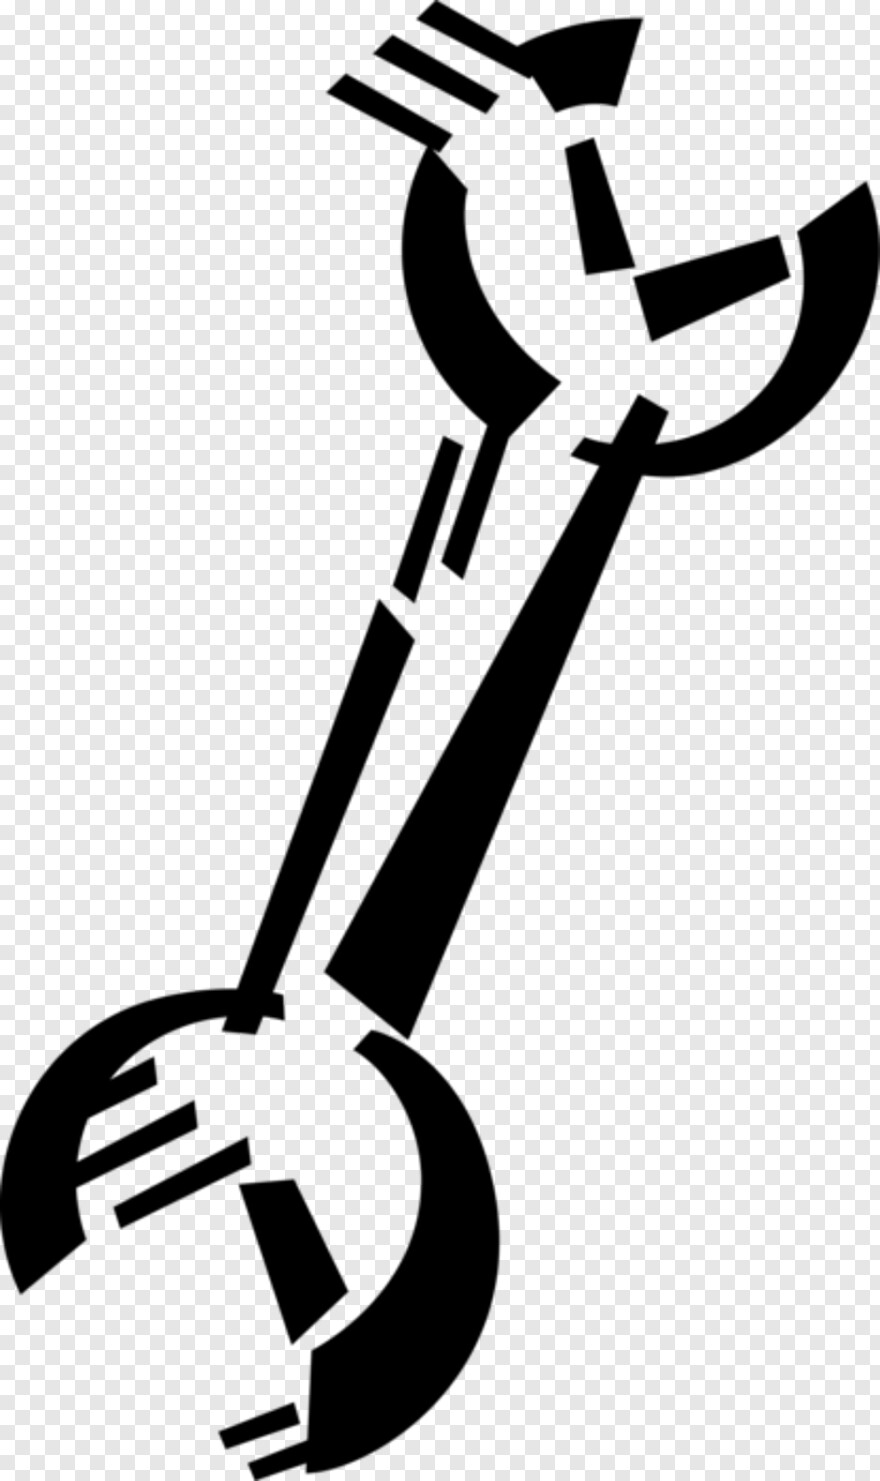 wrench-icon # 565725